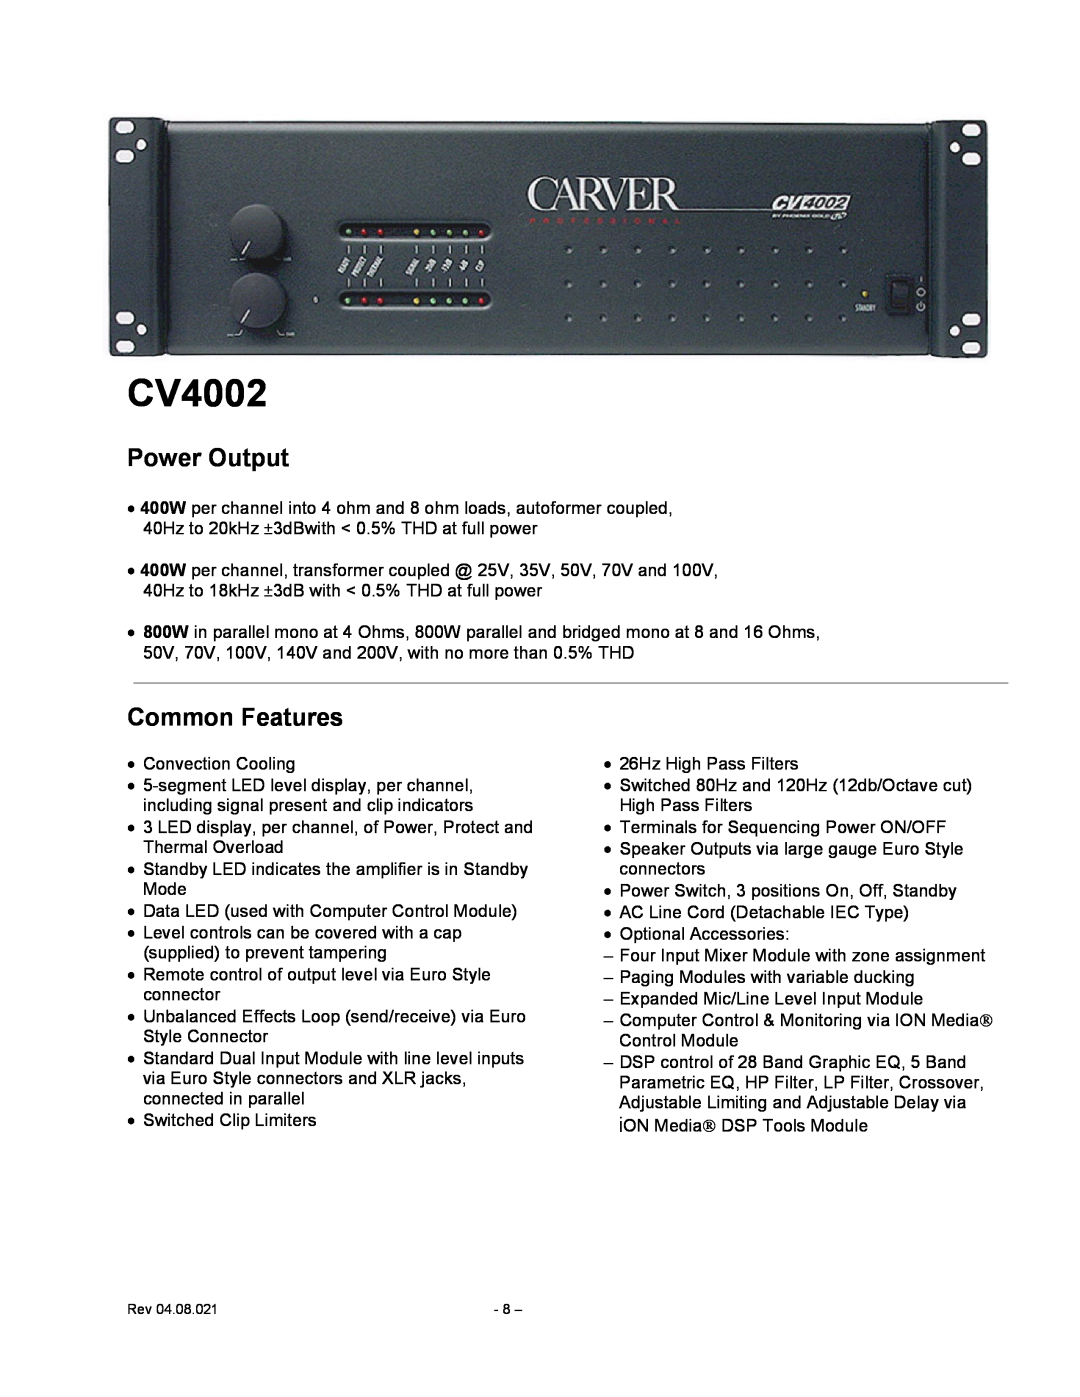 Carver CV Series user manual CV4002, Power Output, Common Features 